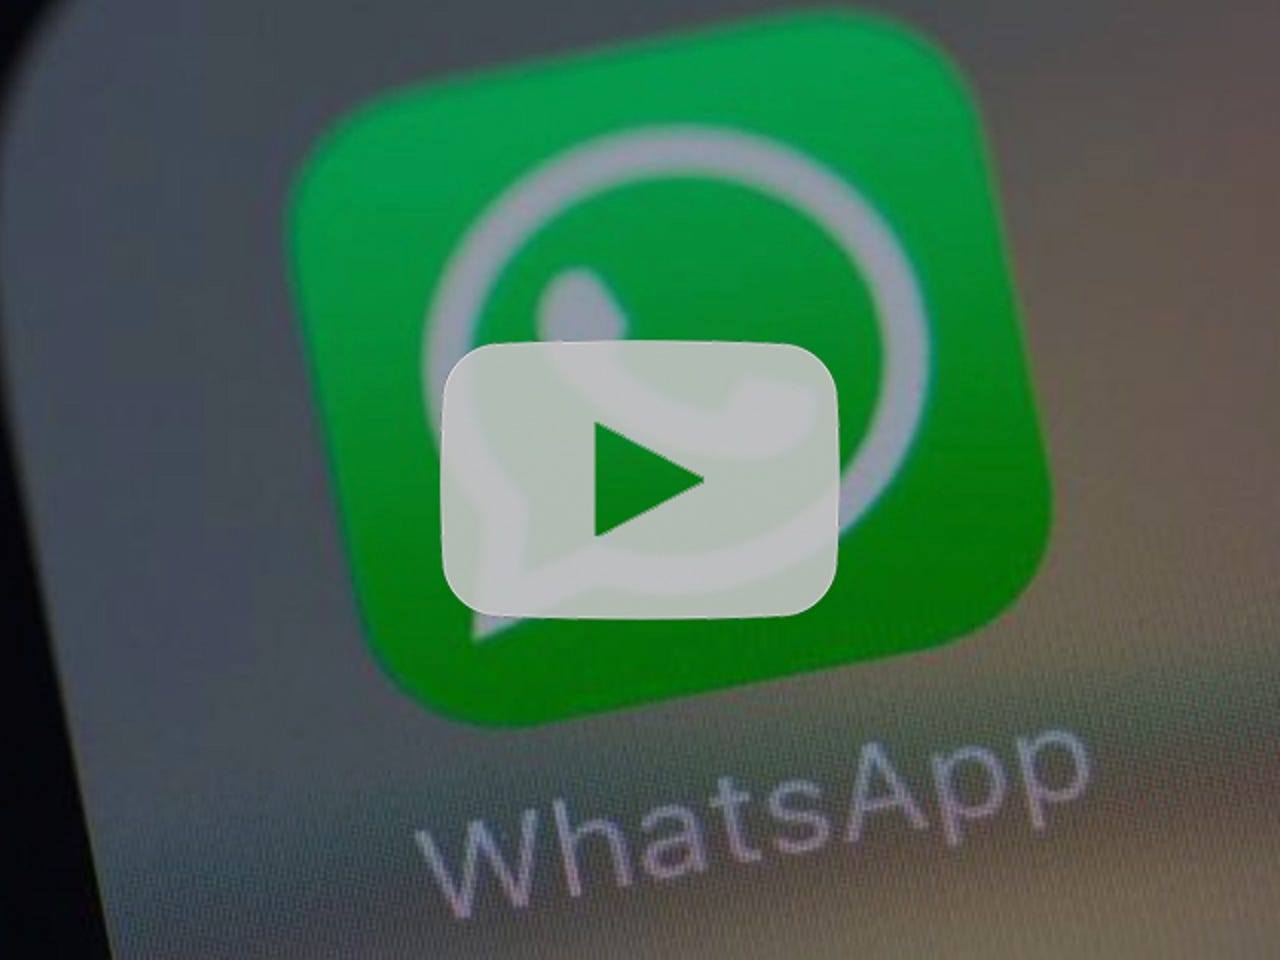 WhatsApp limits message forwarding in India after mob lynchings